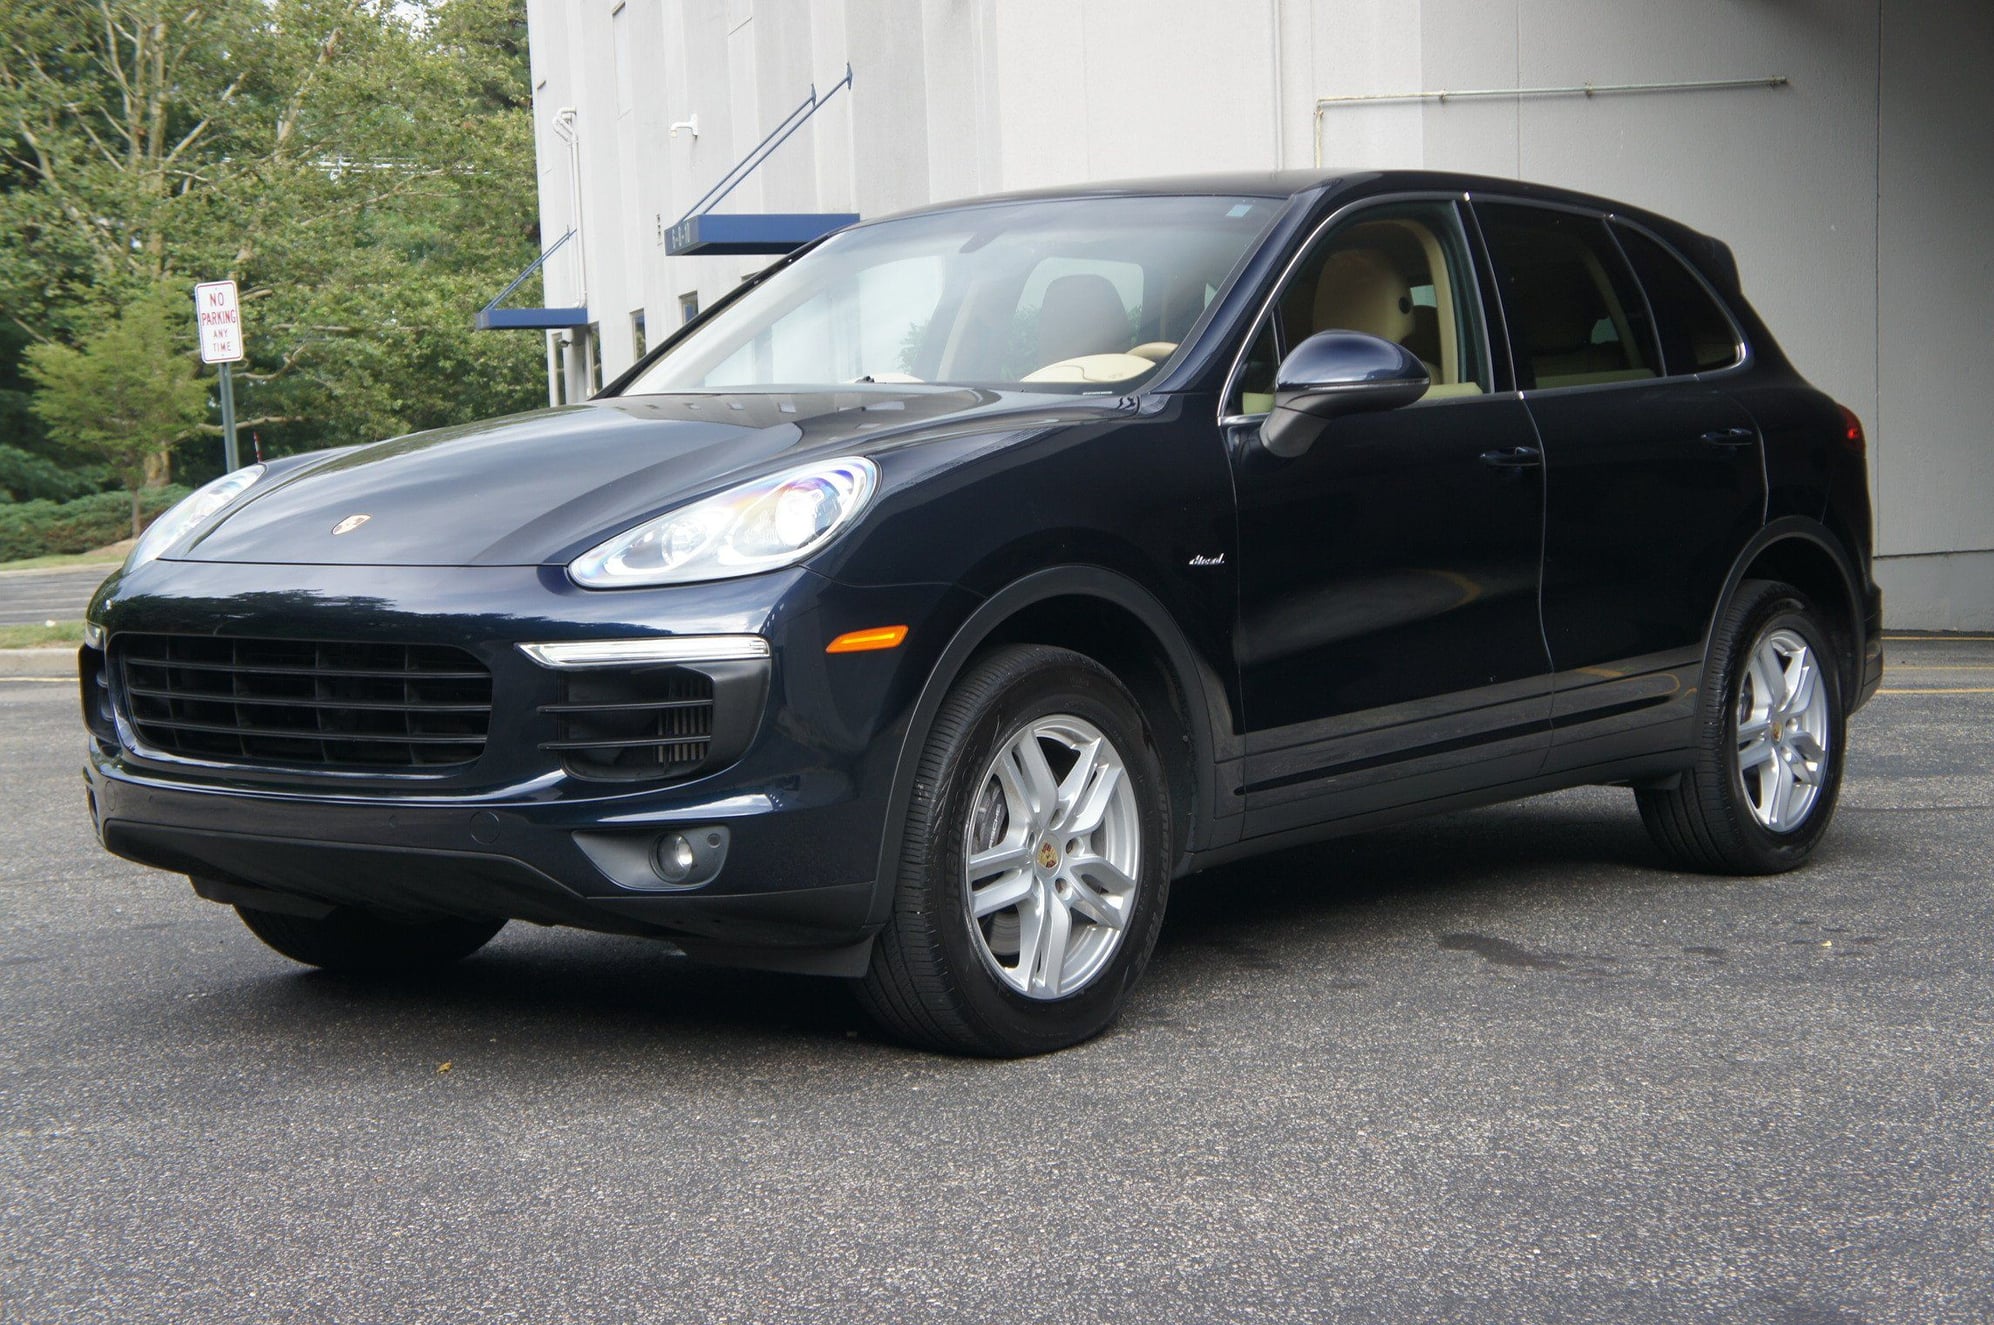 2016 Porsche Cayenne - 2016 PORSCHE CAYENNE DIESEL AWD Not Converted Emission None in the Country!! MSRP $72 - Used - VIN 00000000000000000 - 95,375 Miles - 6 cyl - AWD - Automatic - SUV - Blue - Parsippany, NJ 07054, United States